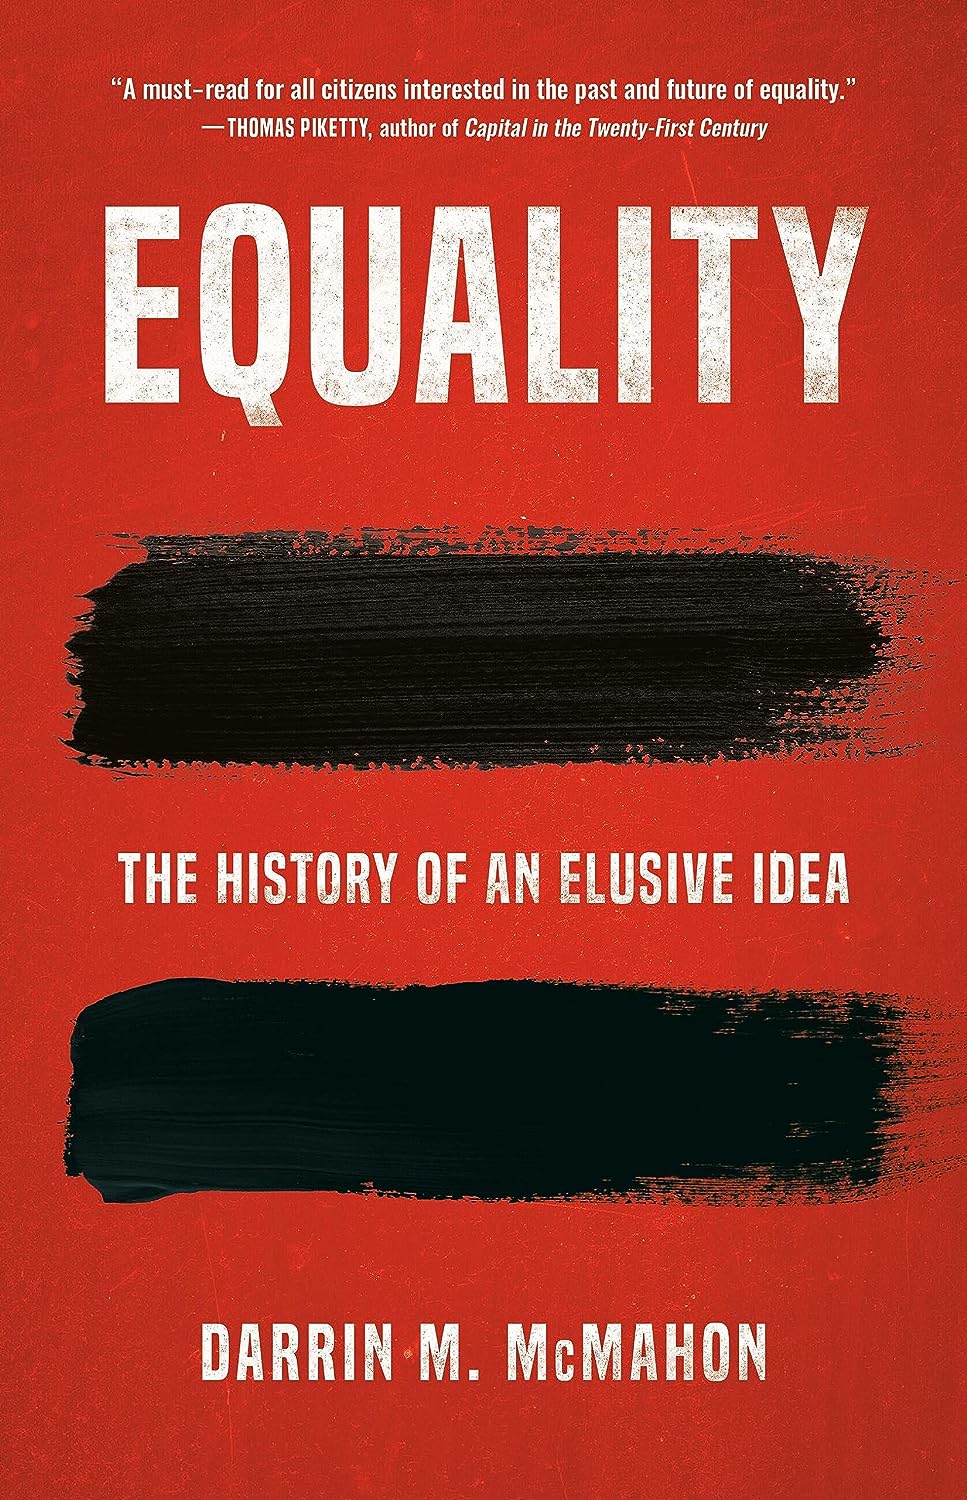 Darrin McMahon_Equality book cover